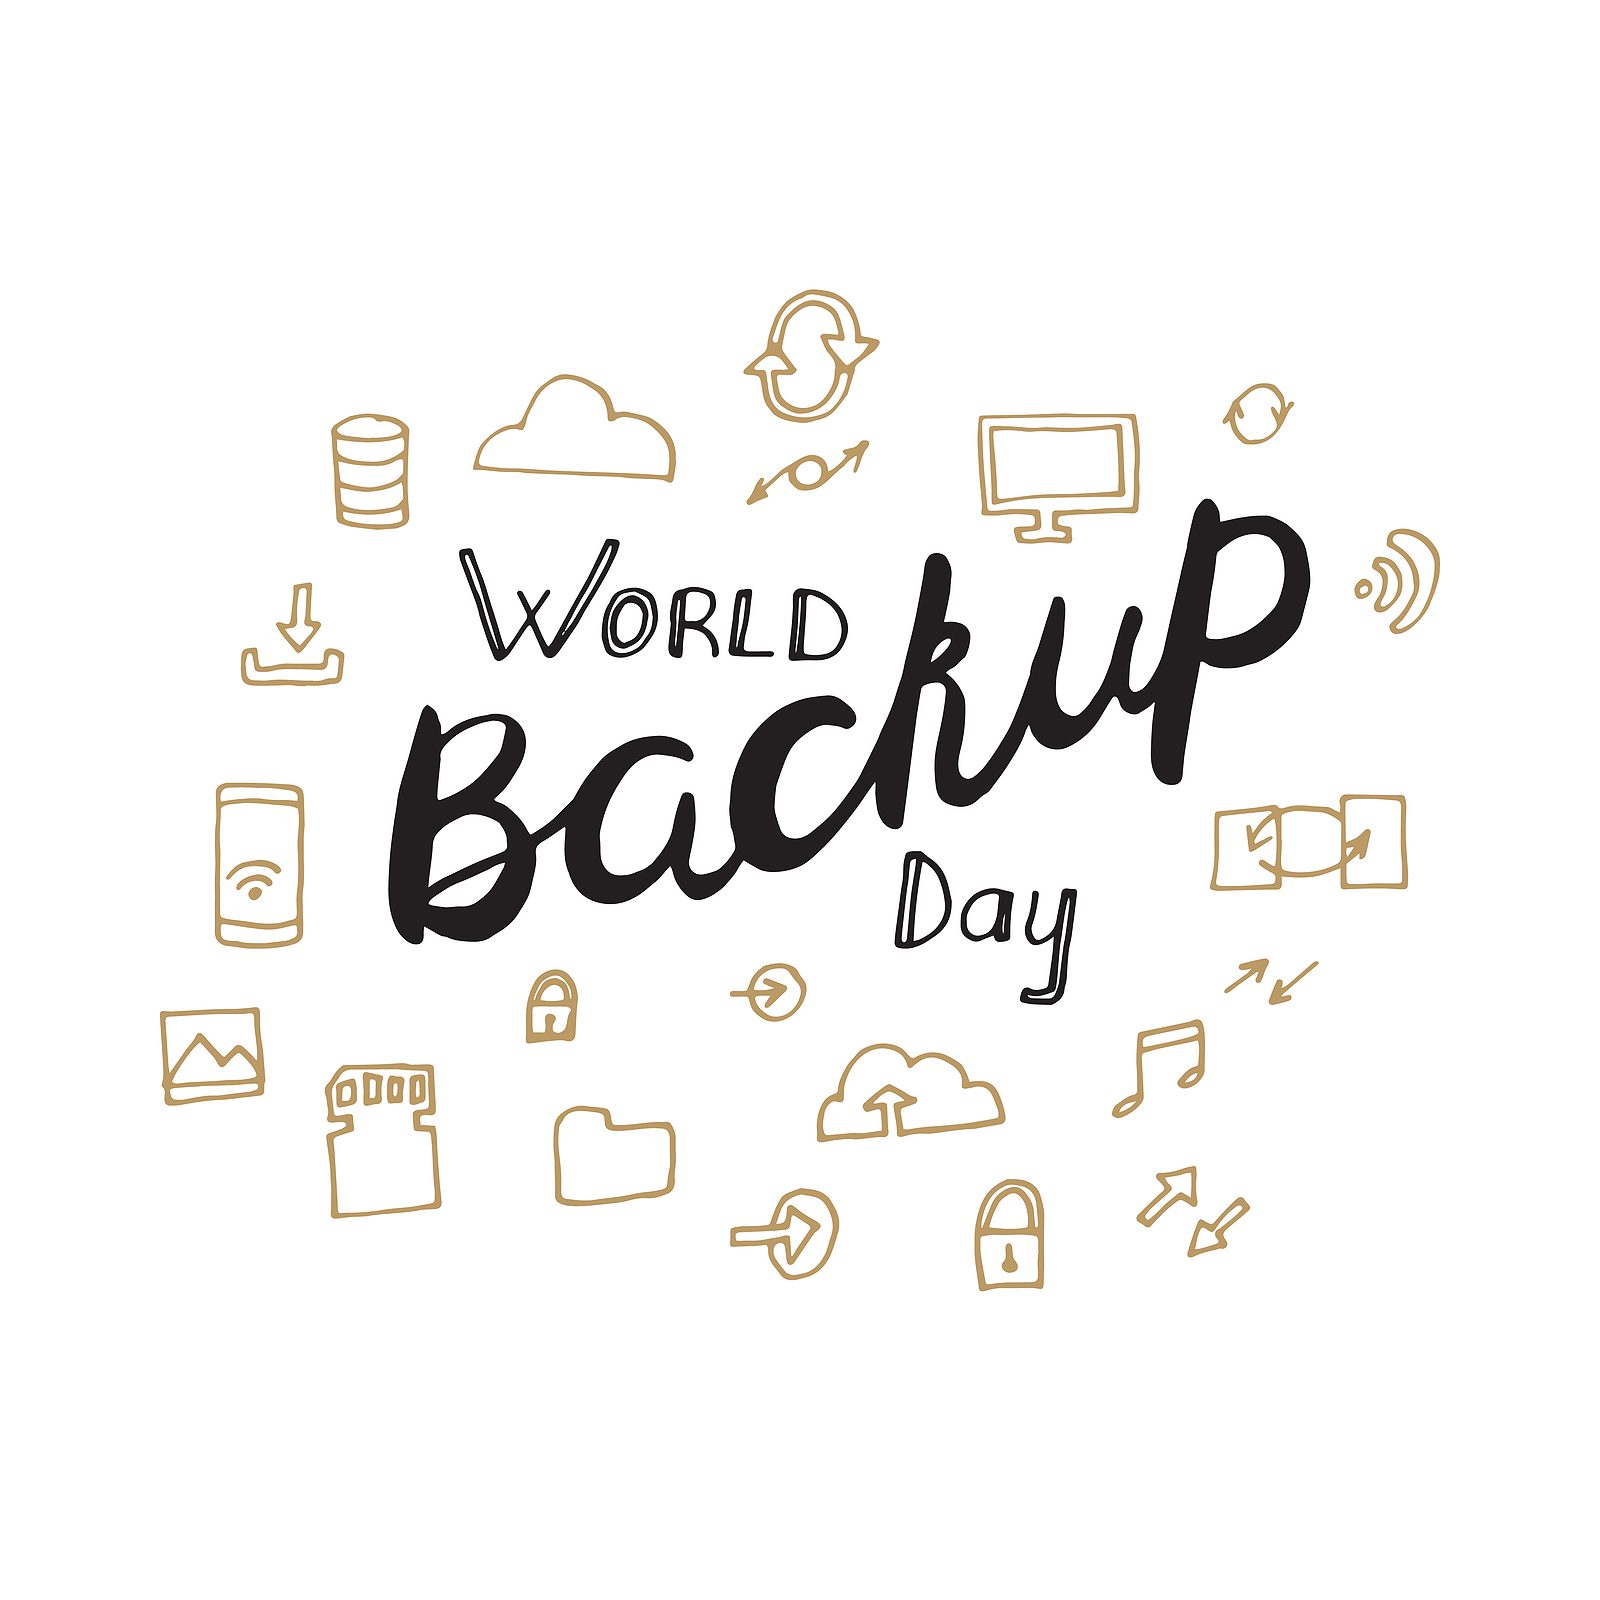 World backup day poster in hand drawn style. Vector illustration